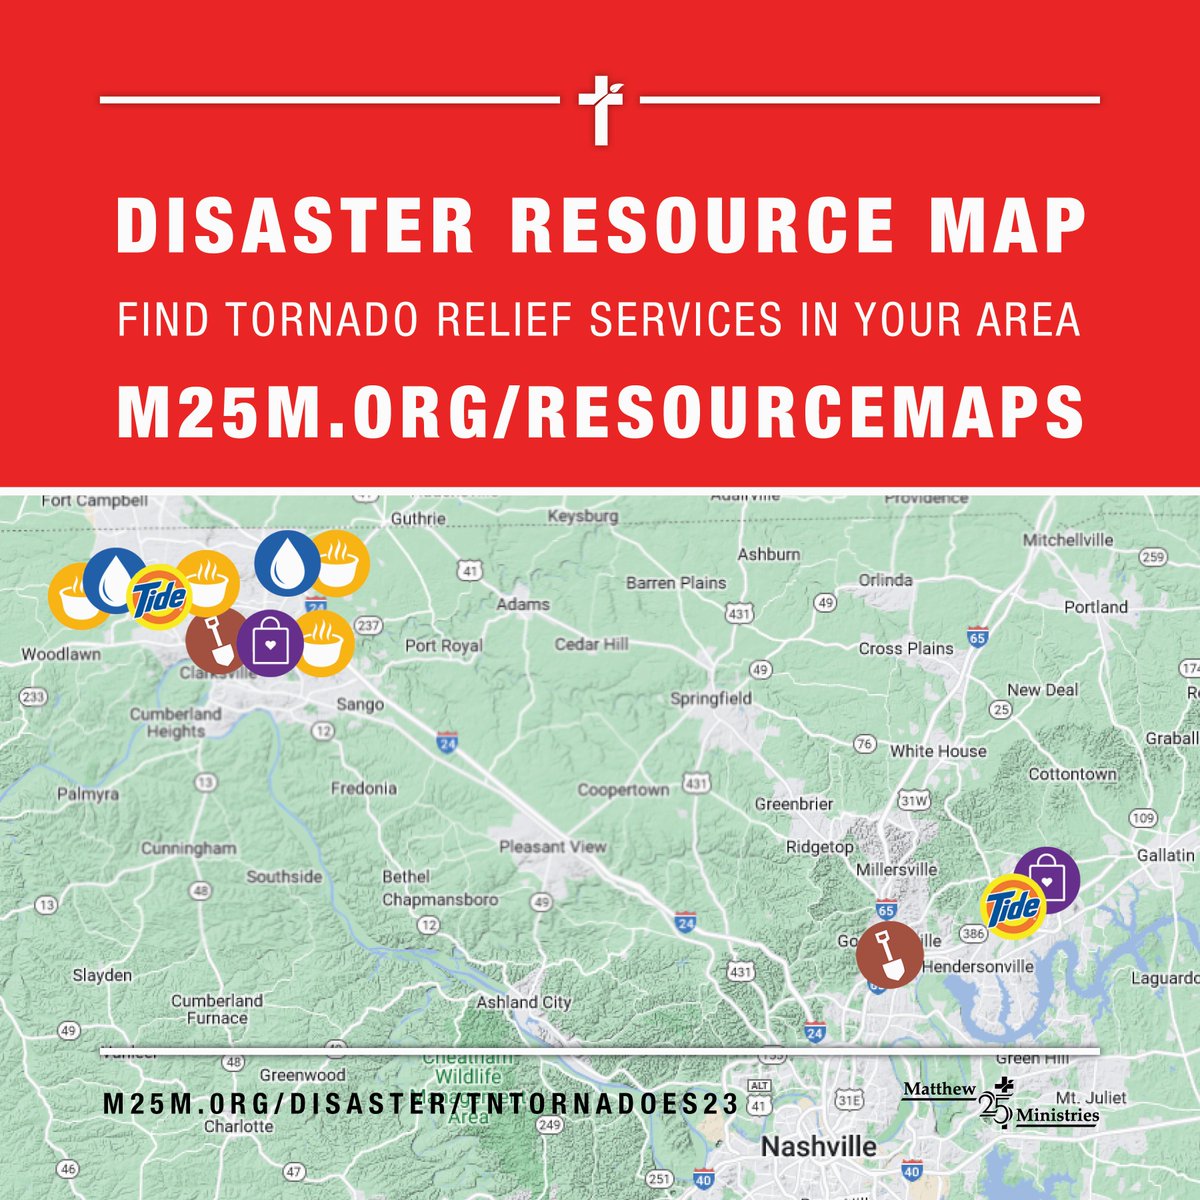 If you or someone you know has been affected by the tornadoes in Tennessee, view our Disaster Resource Map at m25m.org/resourcemaps to find relief supplies, services, and more in your area. Additional resources will be added as they become available.